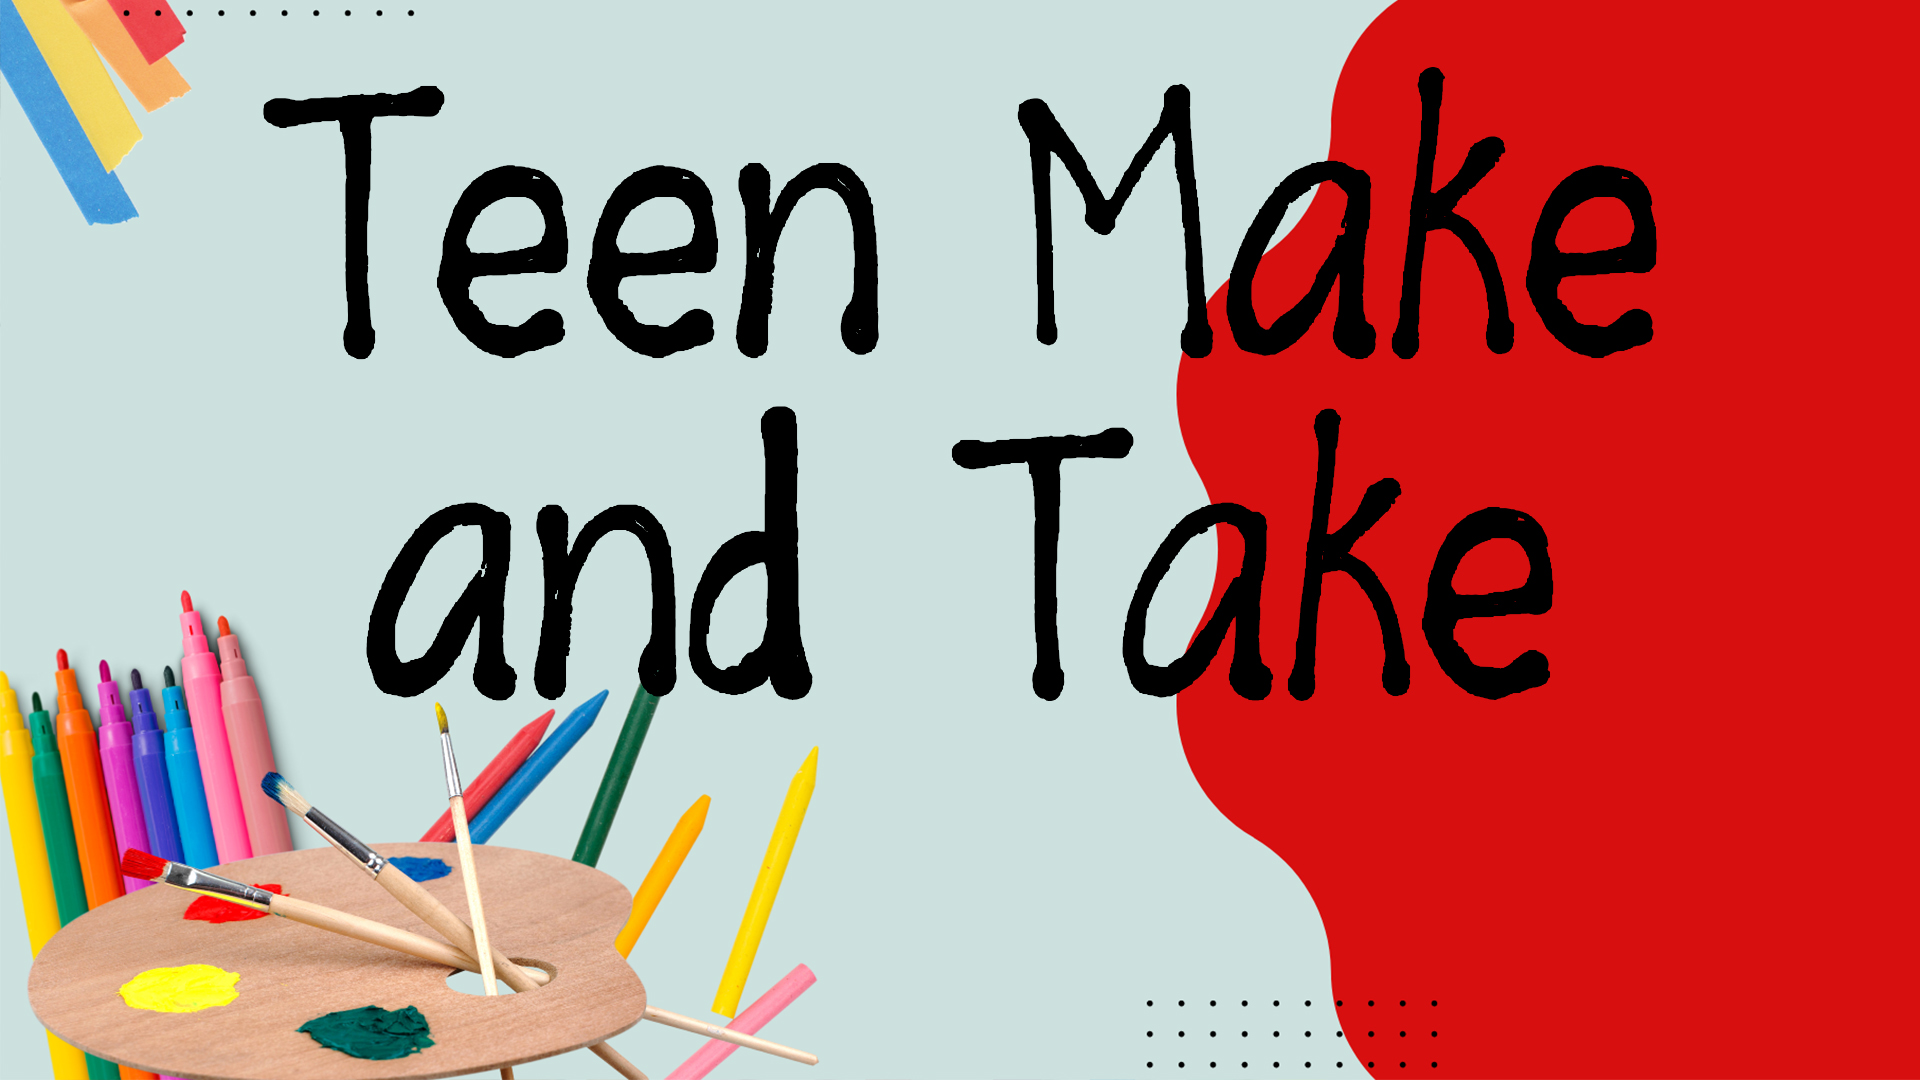 Image reads "Teen Make and Take". Markers, crayons, and a paint palette are in the bottom left corner.